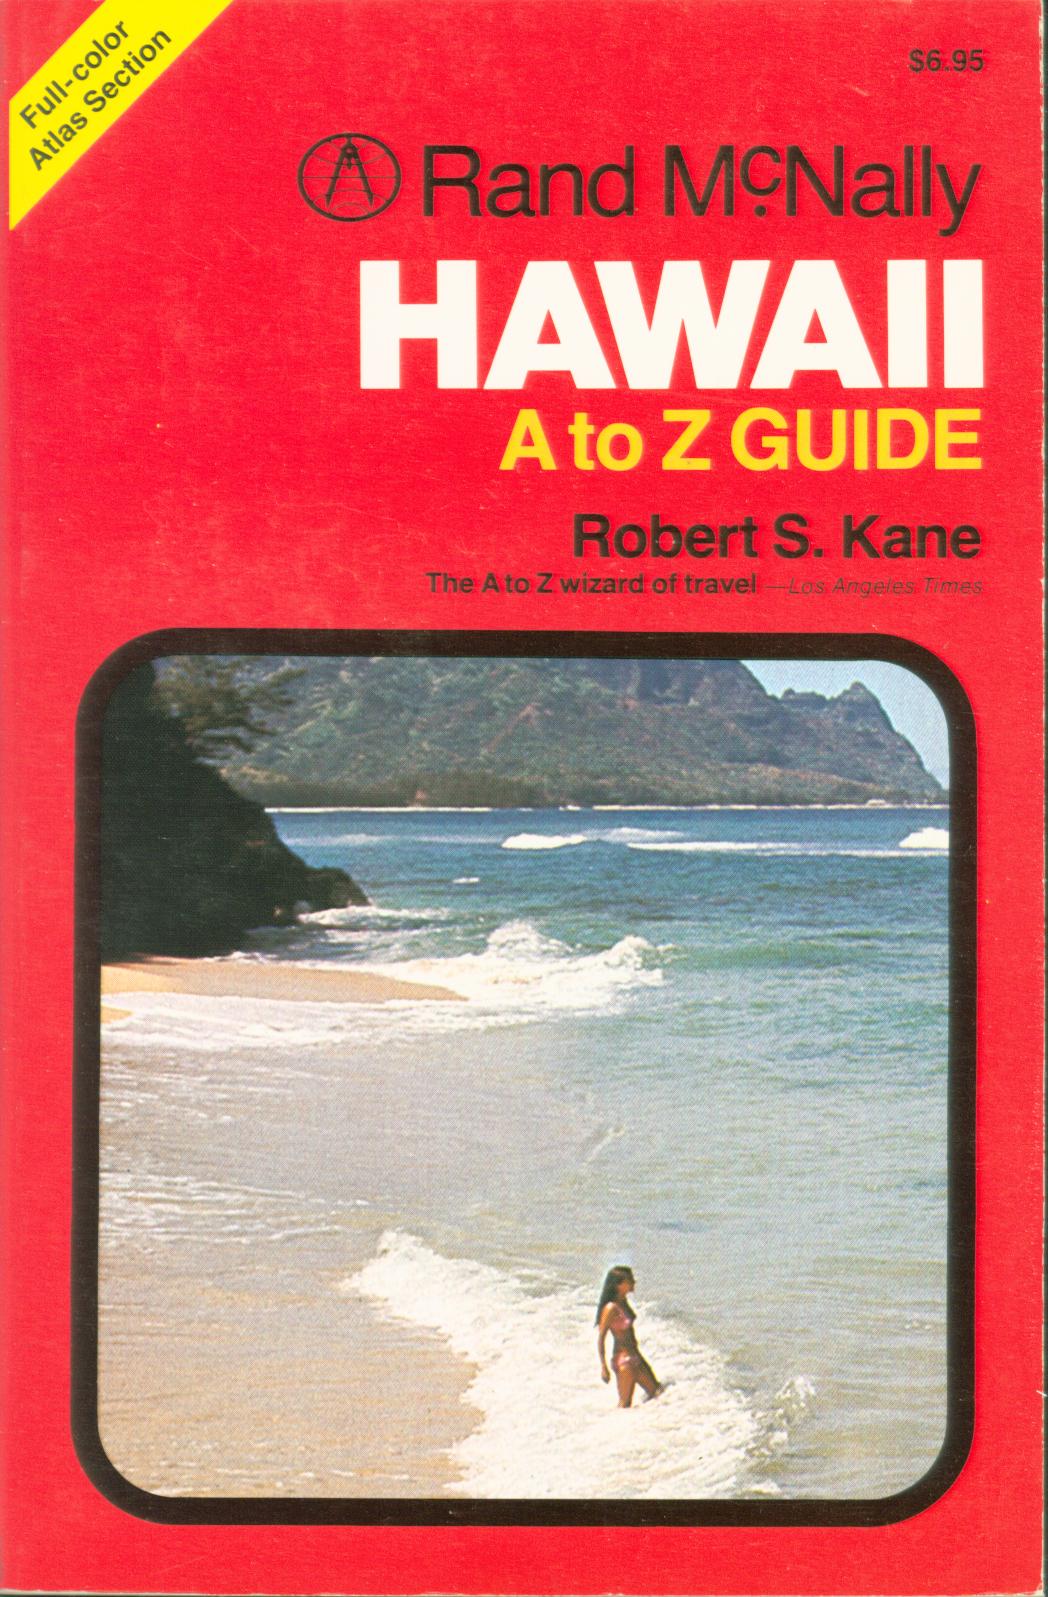 HAWAII: A to Z guide.